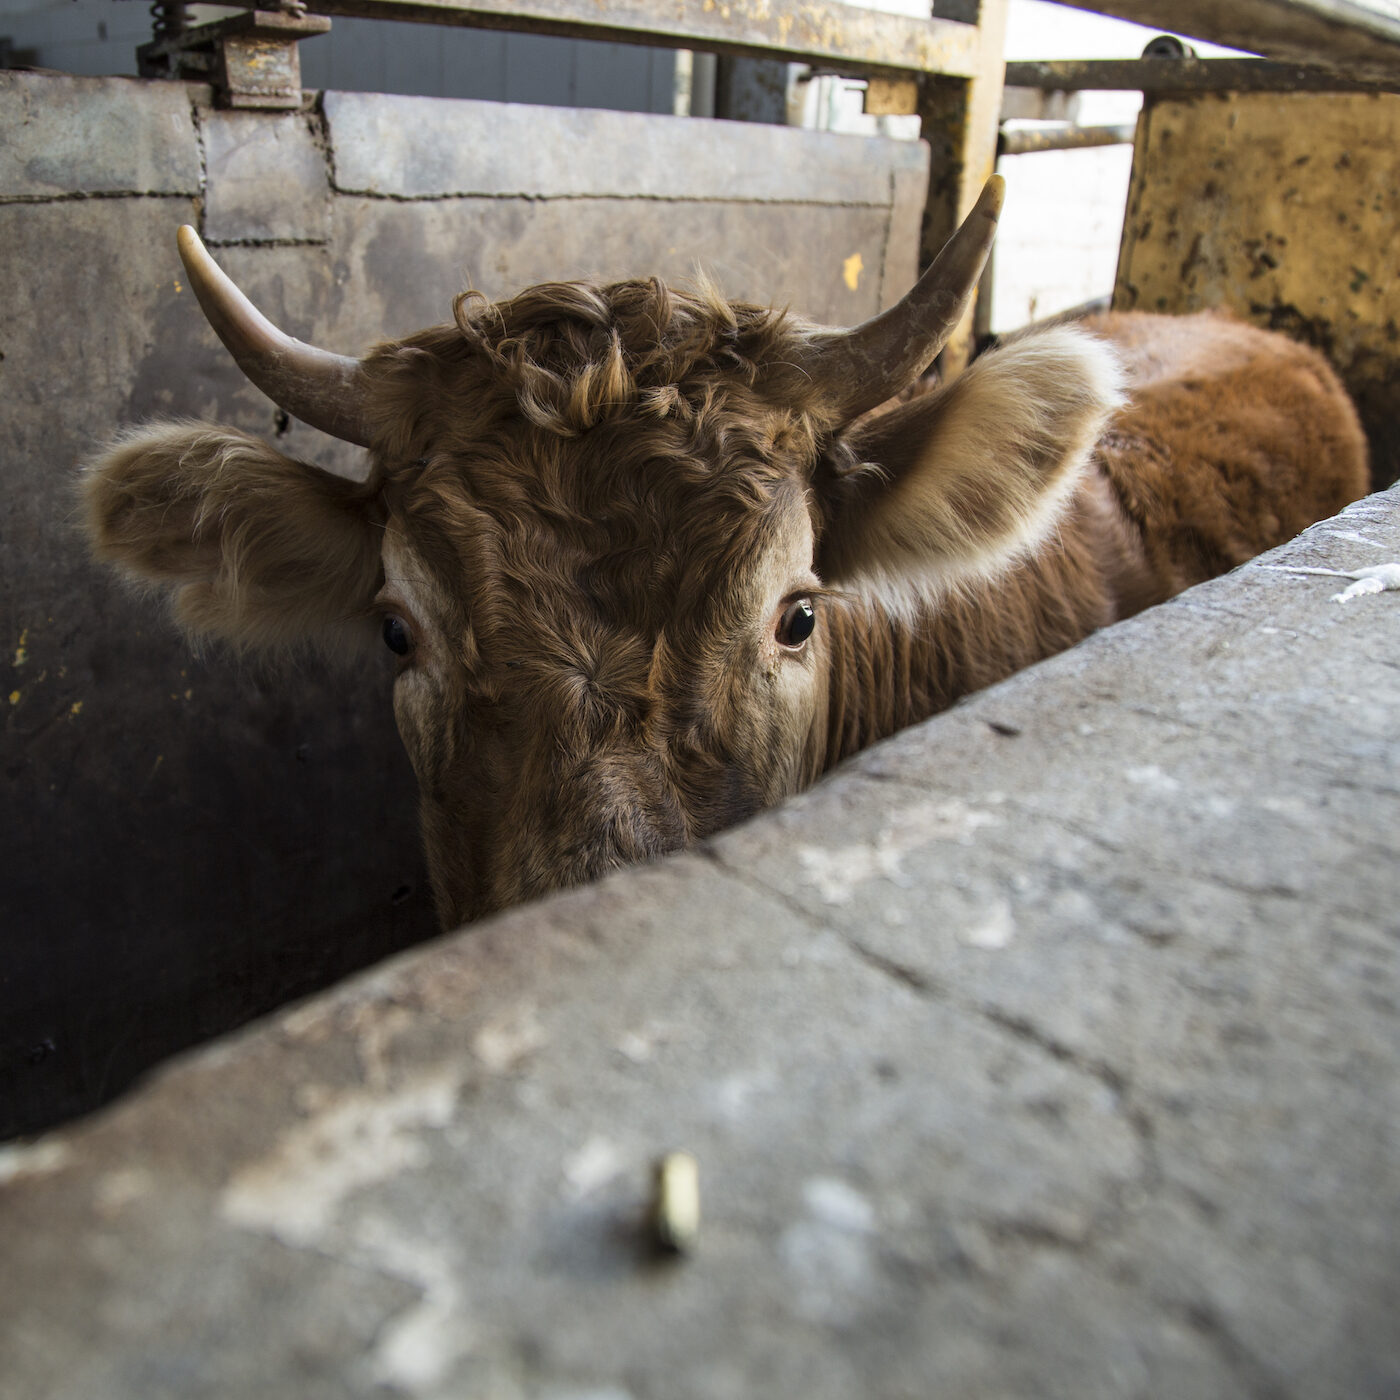 7 Measures to Reduce Animal Suffering in Spain